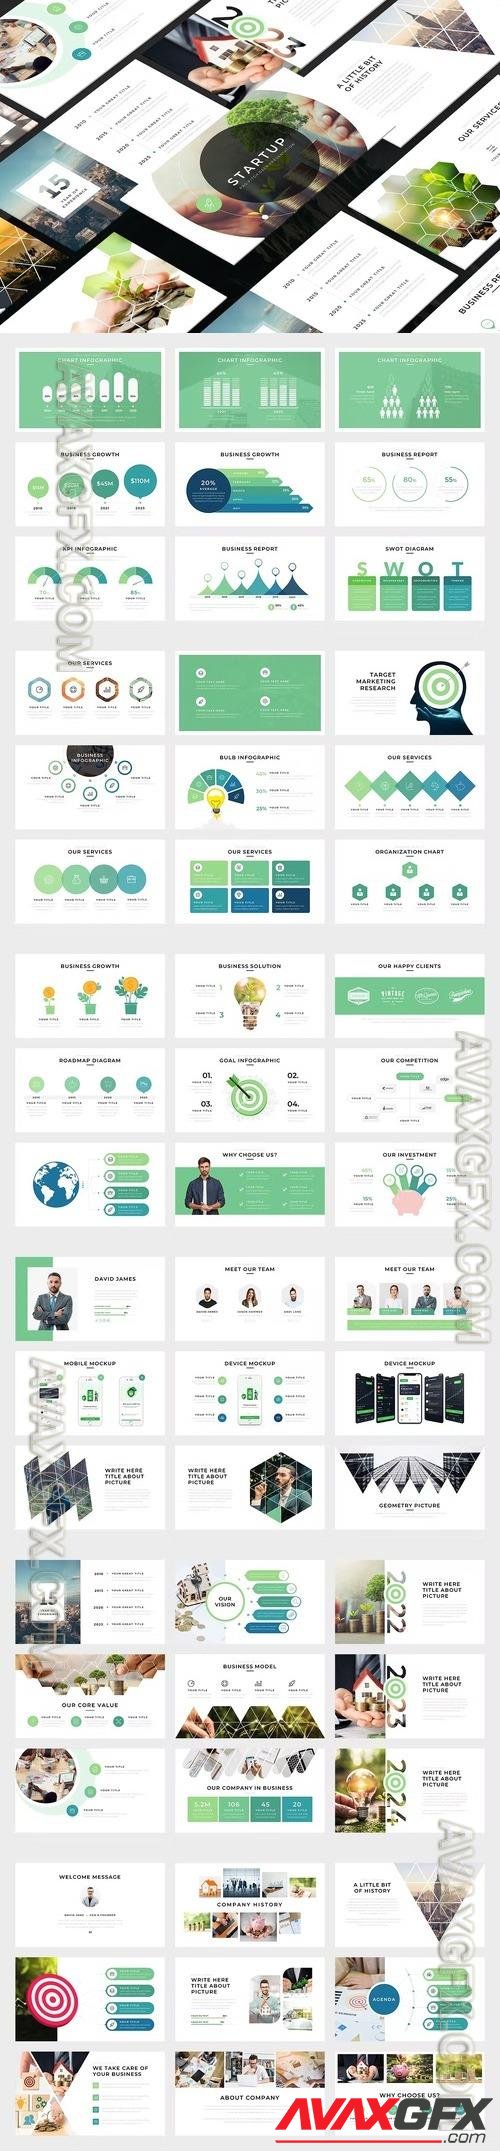 Startup - Pro Pitch Deck Powerpoint Template